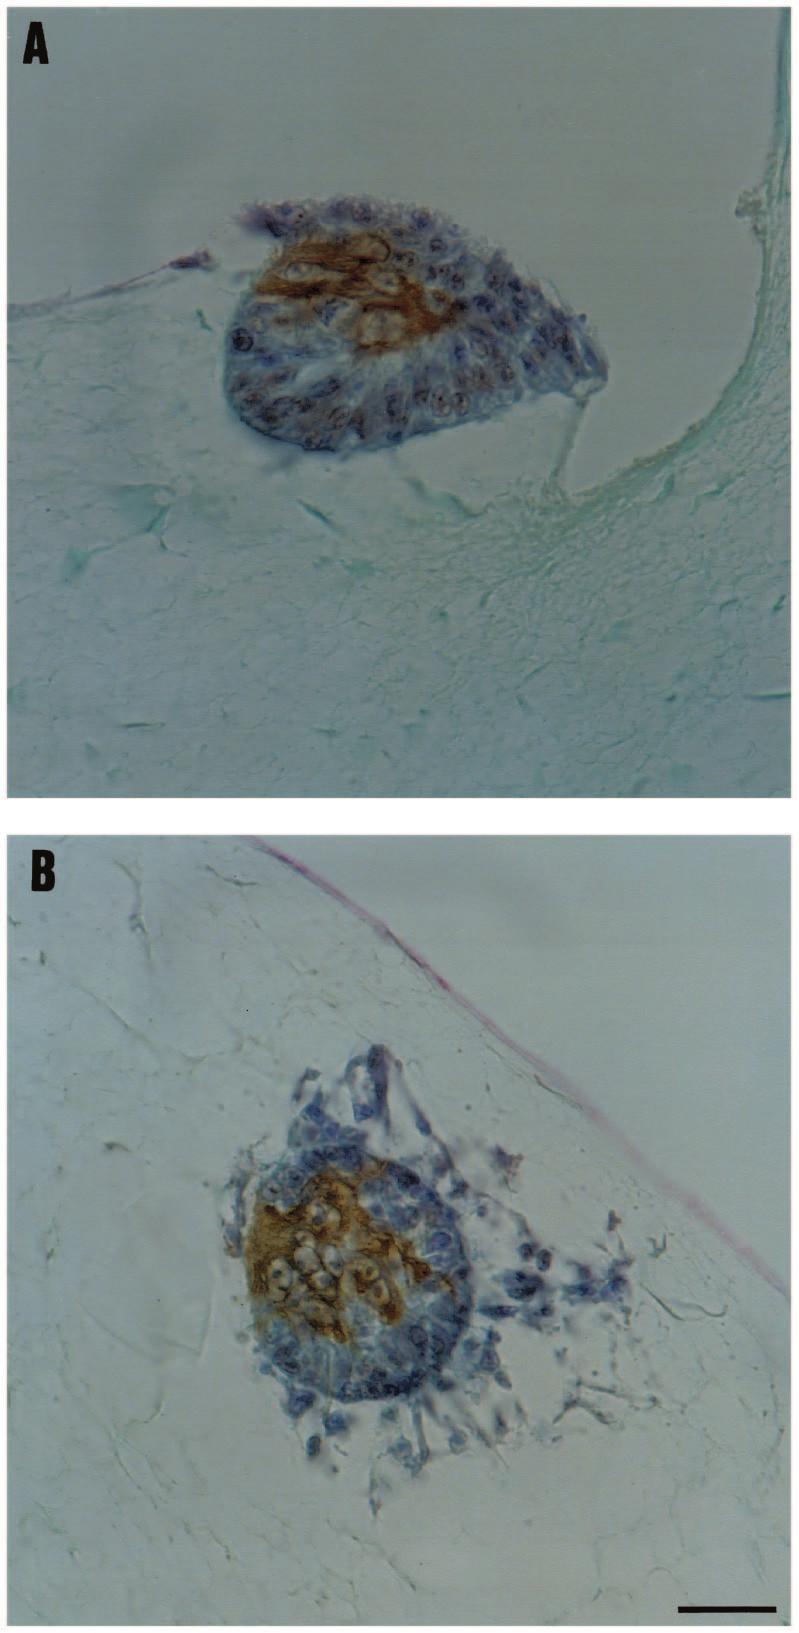 NT-3 and dermis development 2589 panels B in Figs 7 and 6).